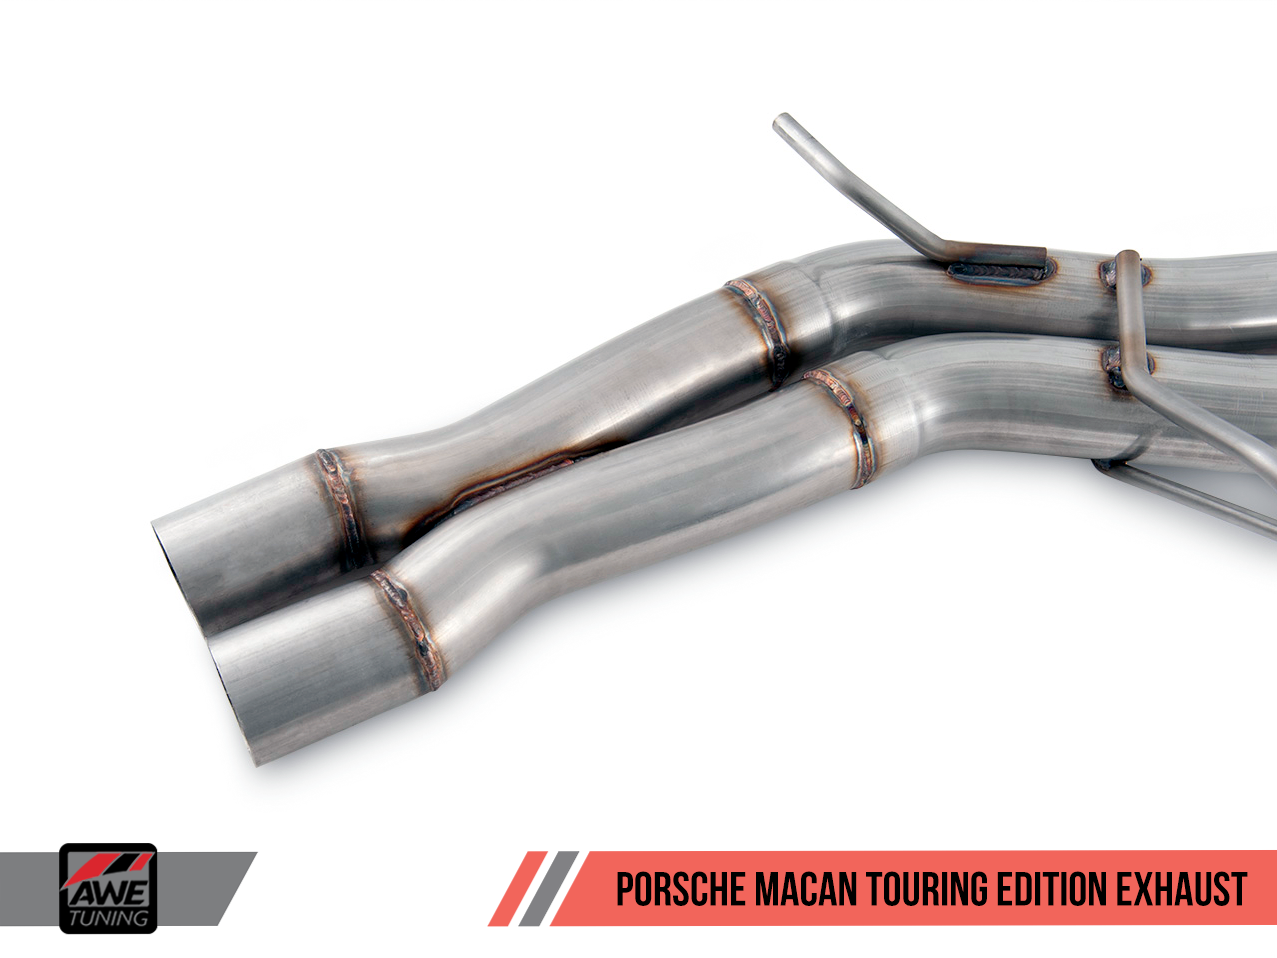 AWE Touring Edition Exhaust System for Porsche Macan S / GTS / Turbo - Diamond Black 102mm Tips - 0